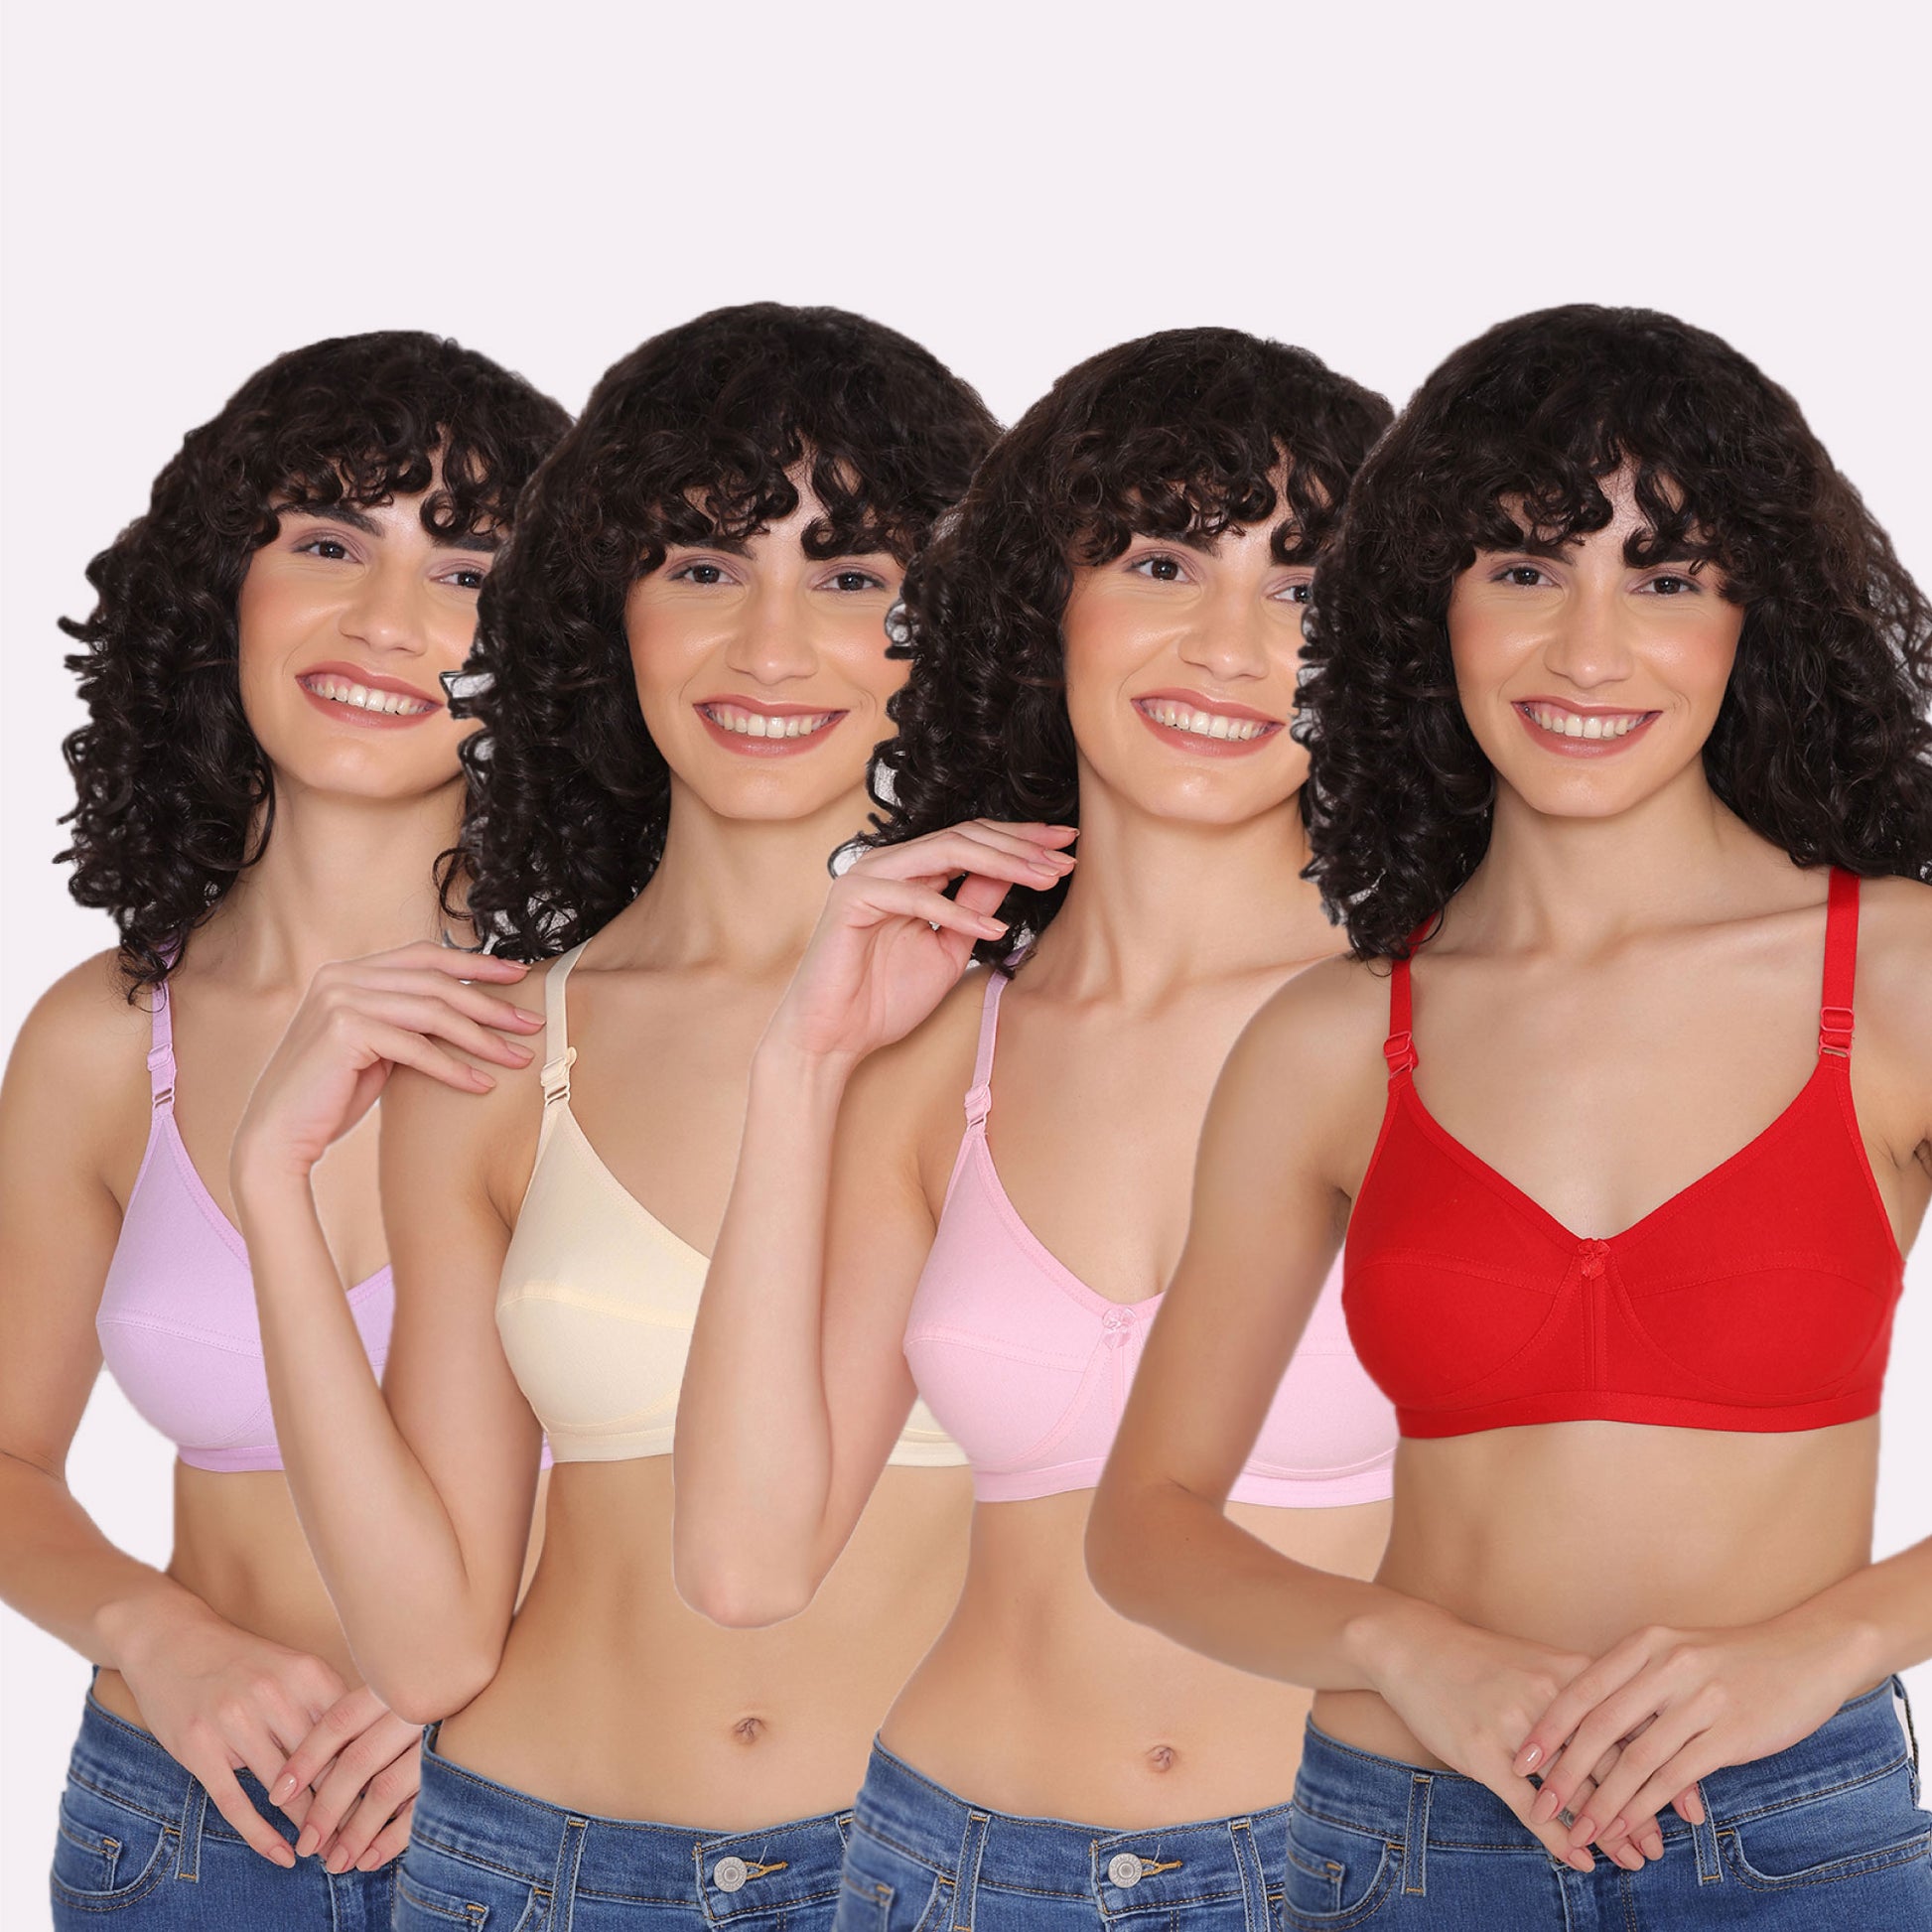 Inkurv Bra Collection  Non-Wired Full Coverage Everyday Bras